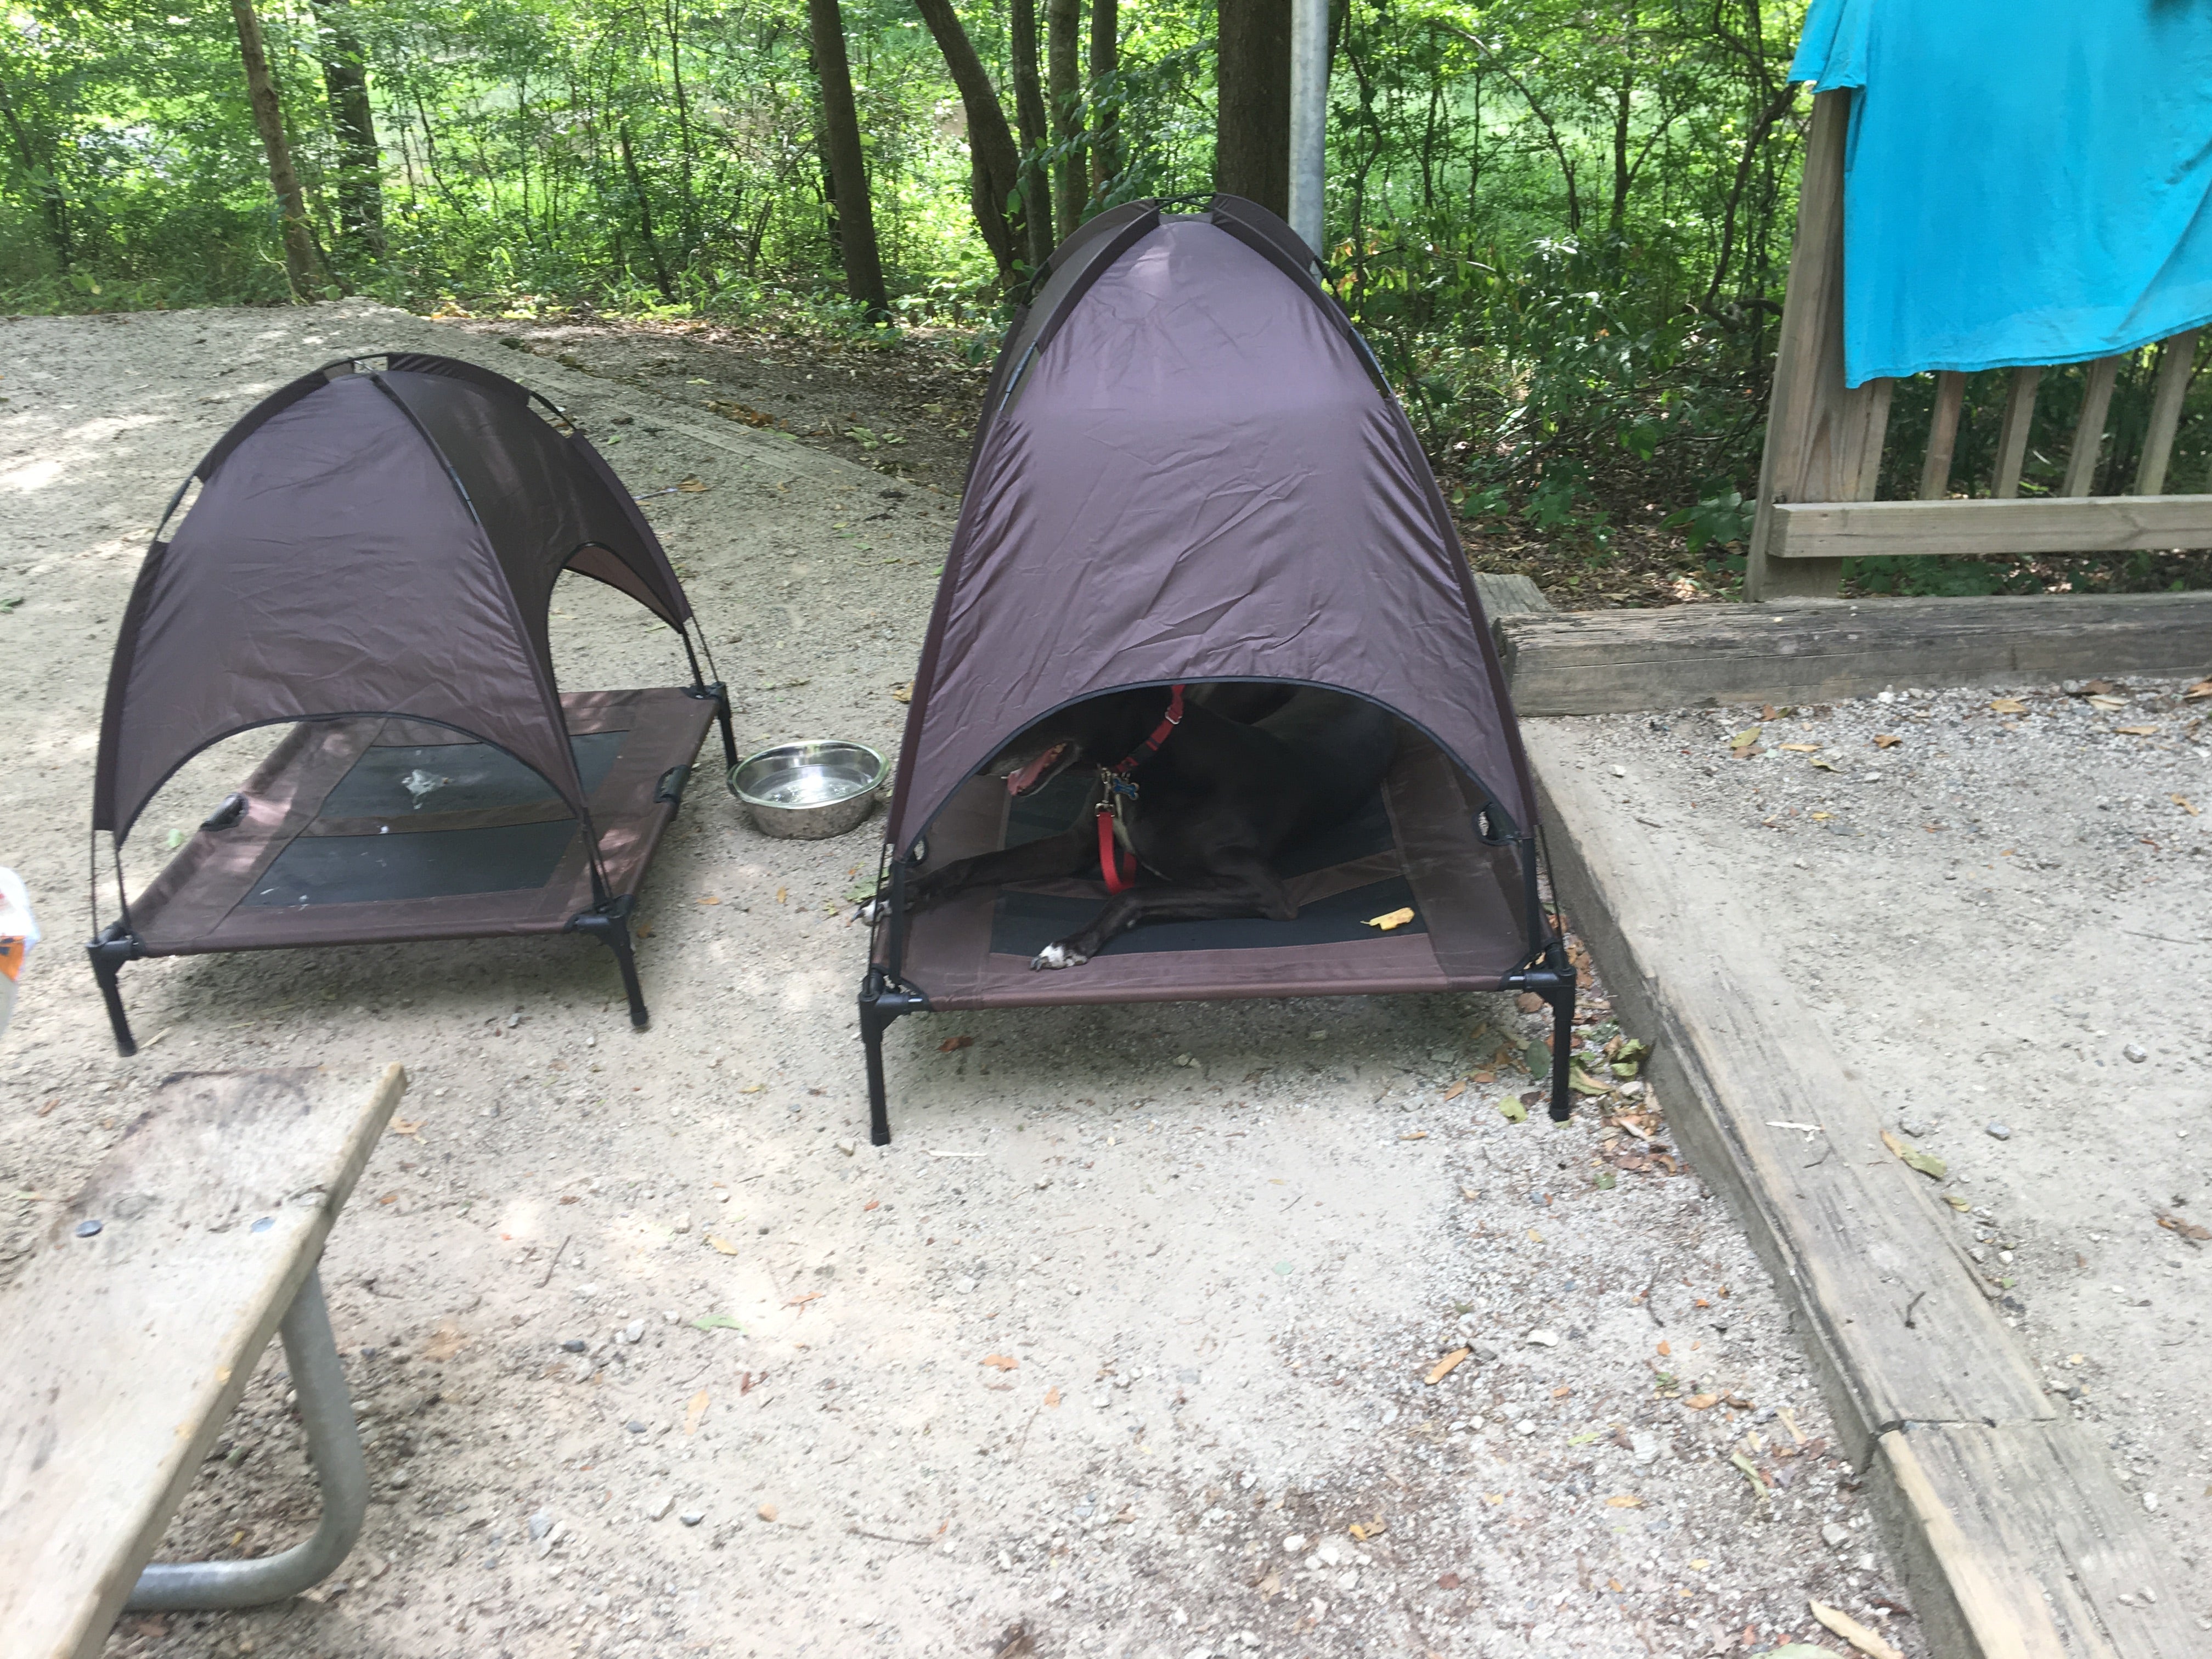 Our two dogs love camping too